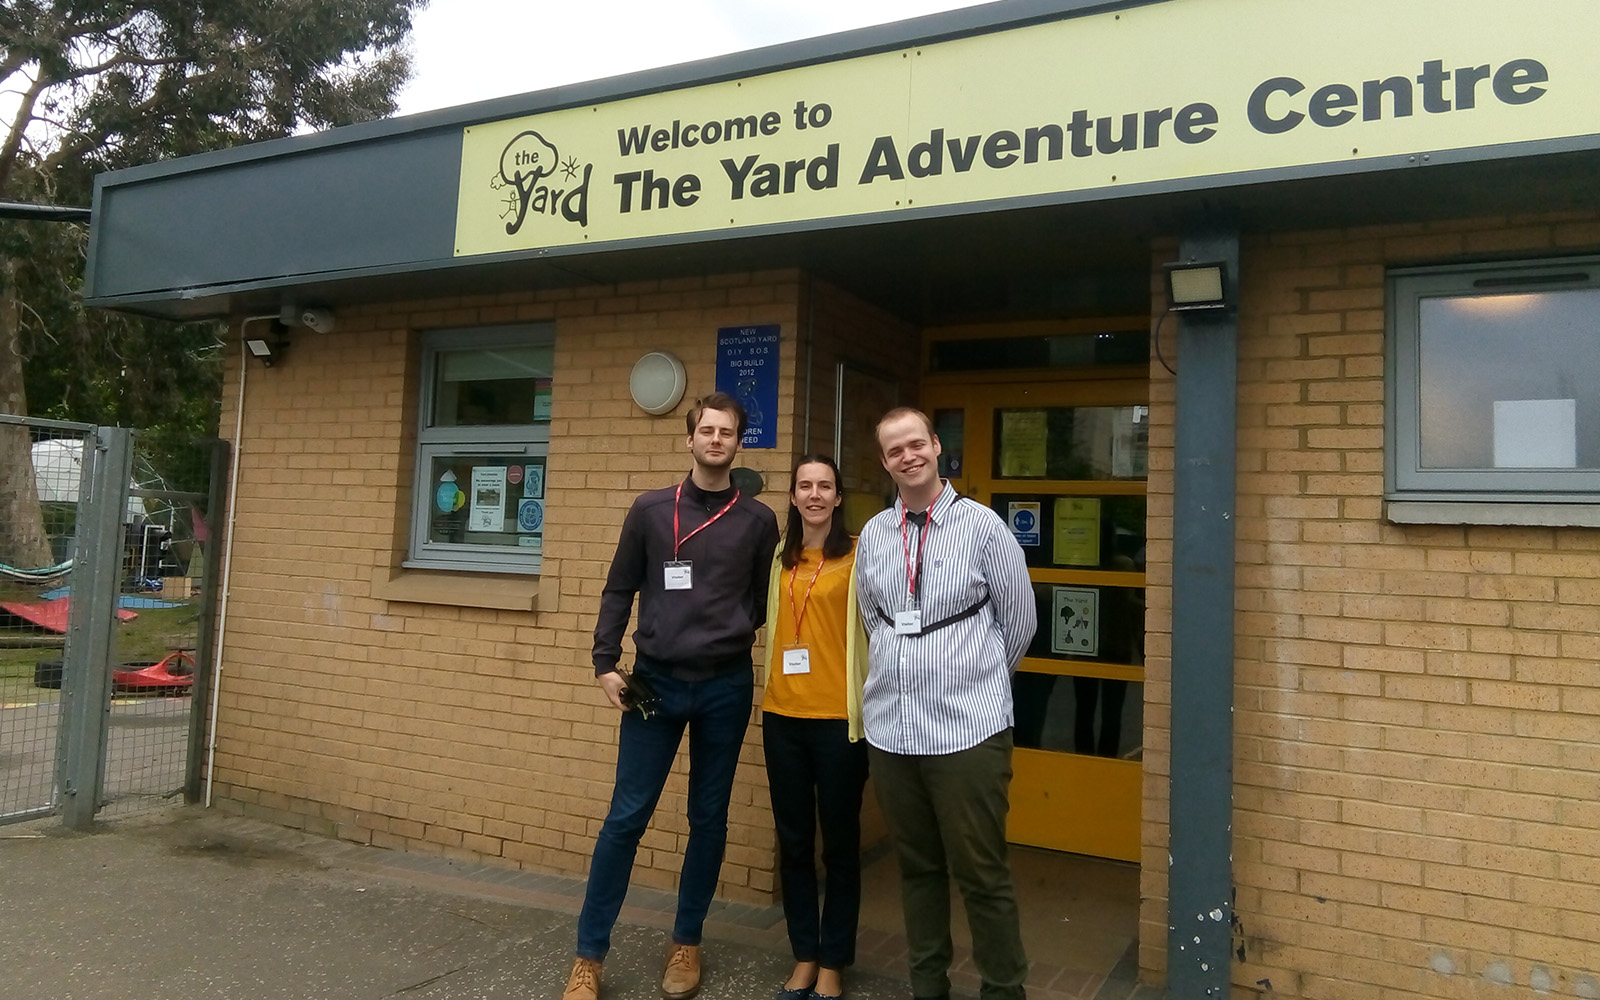 Three people standing together at the front entrance of a building. Above the door a sign reads Welcome to The Yard Adventure Centre